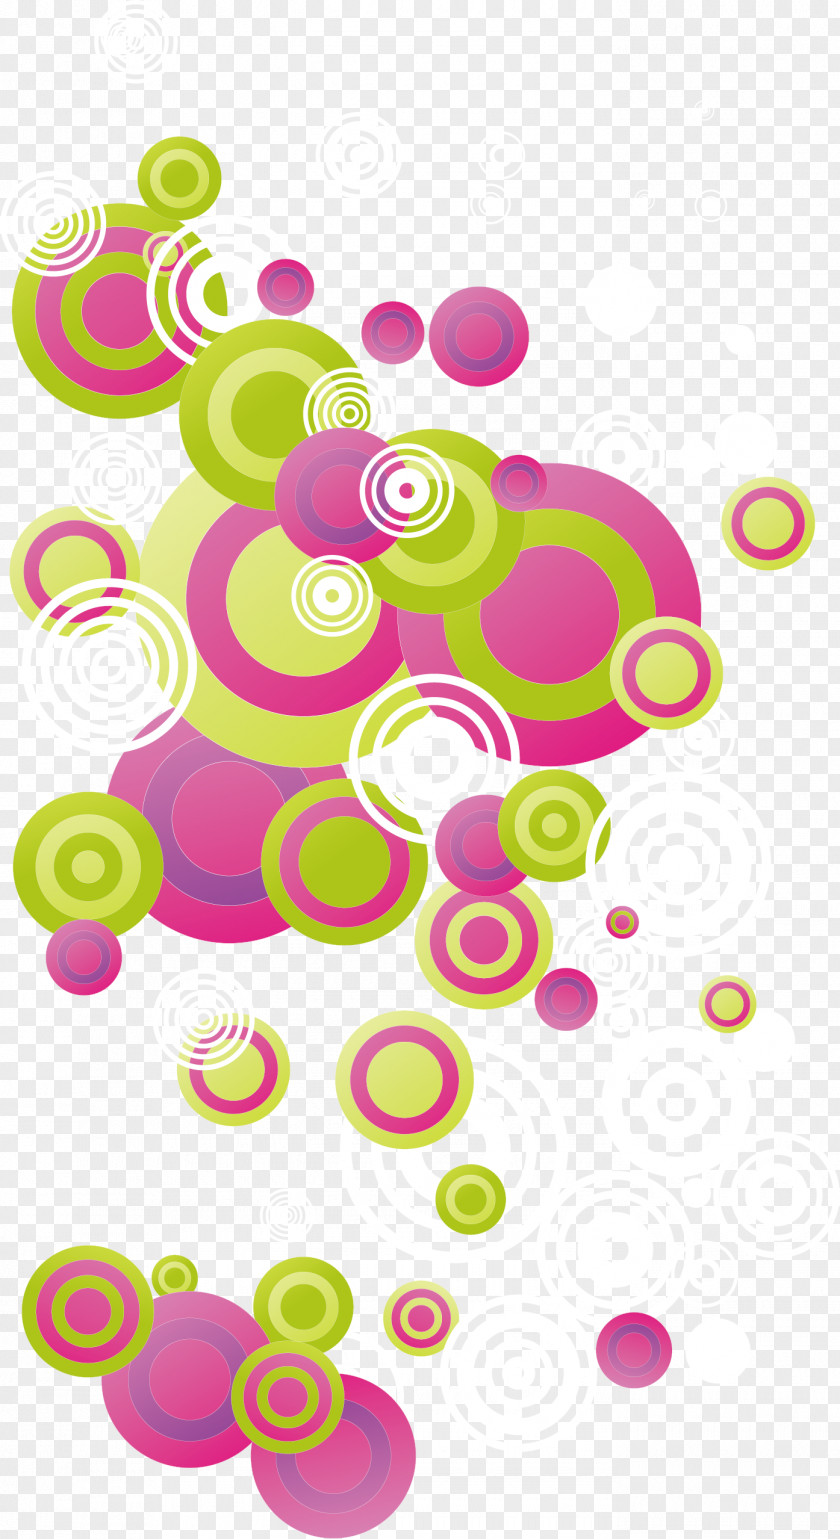 Colored Circles Background Clip Art PNG